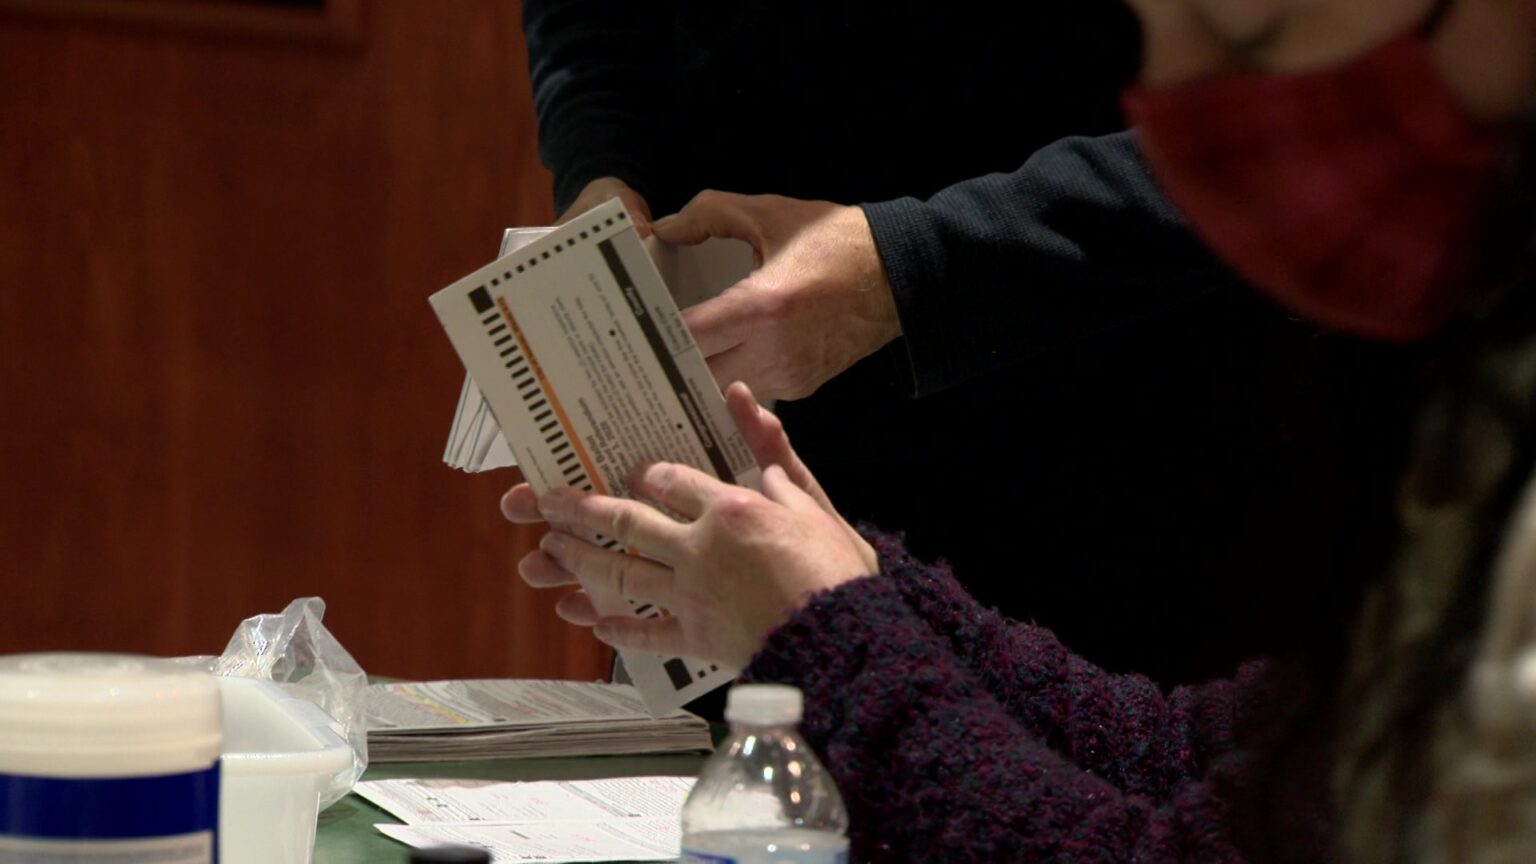 Elections workers open absentee ballots while seated and standing at a table.